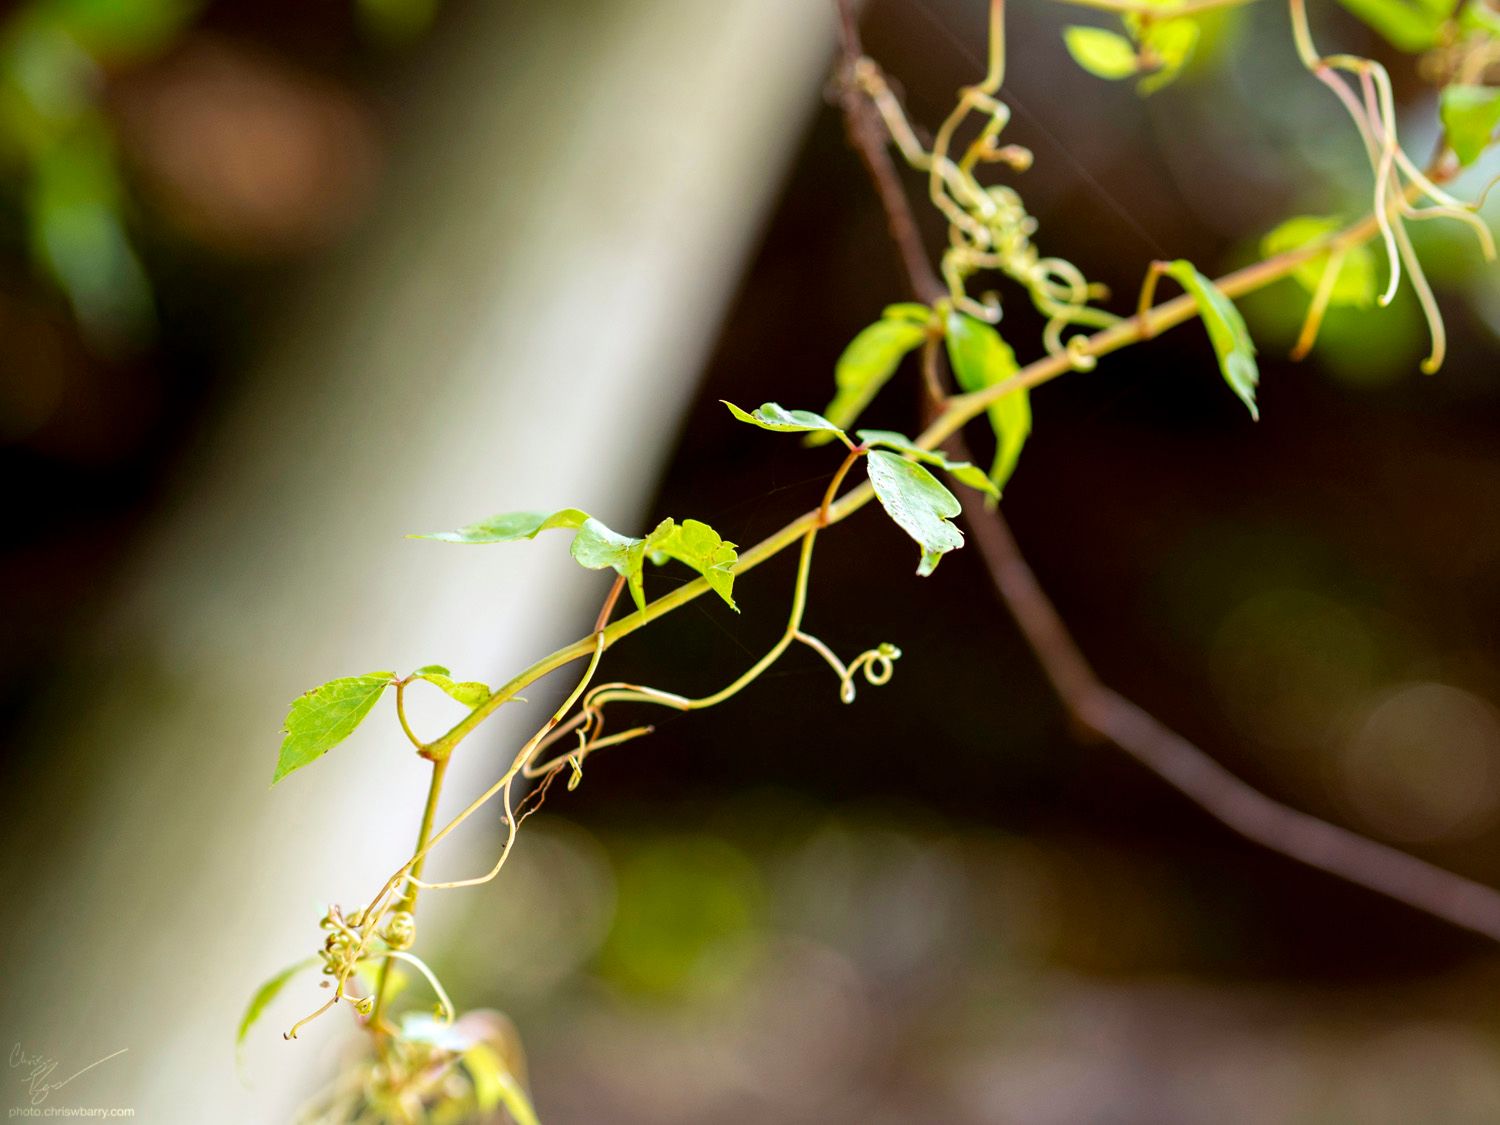 A photo of a virginia creeper vine with narrow depth of field. there are several tendrils coming off of it